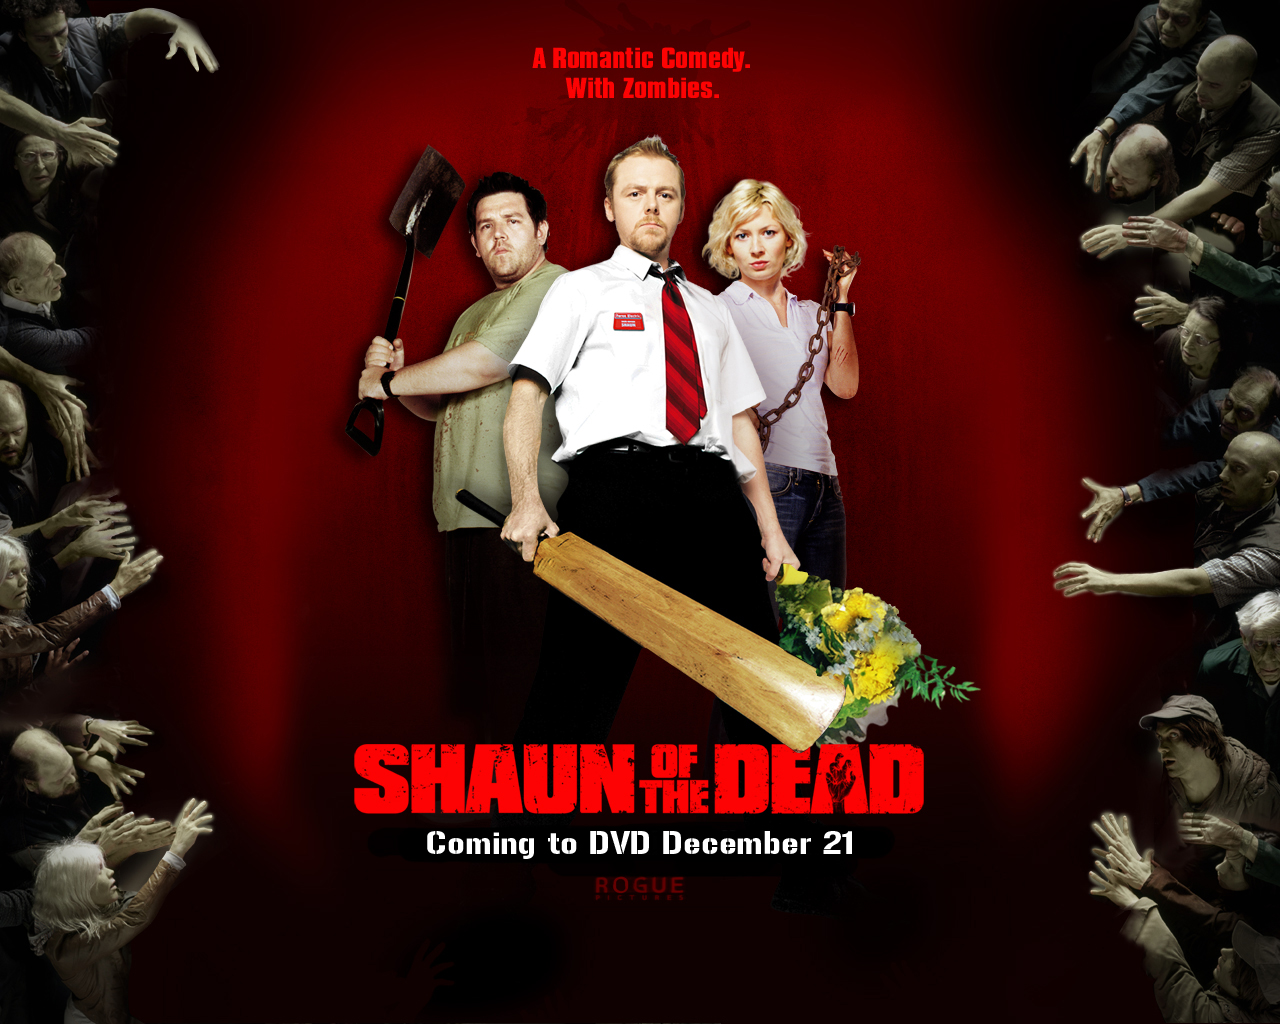 Geek insider, geekinsider, geekinsider. Com,, 5 things you didn't know about 'shaun of the dead', entertainment